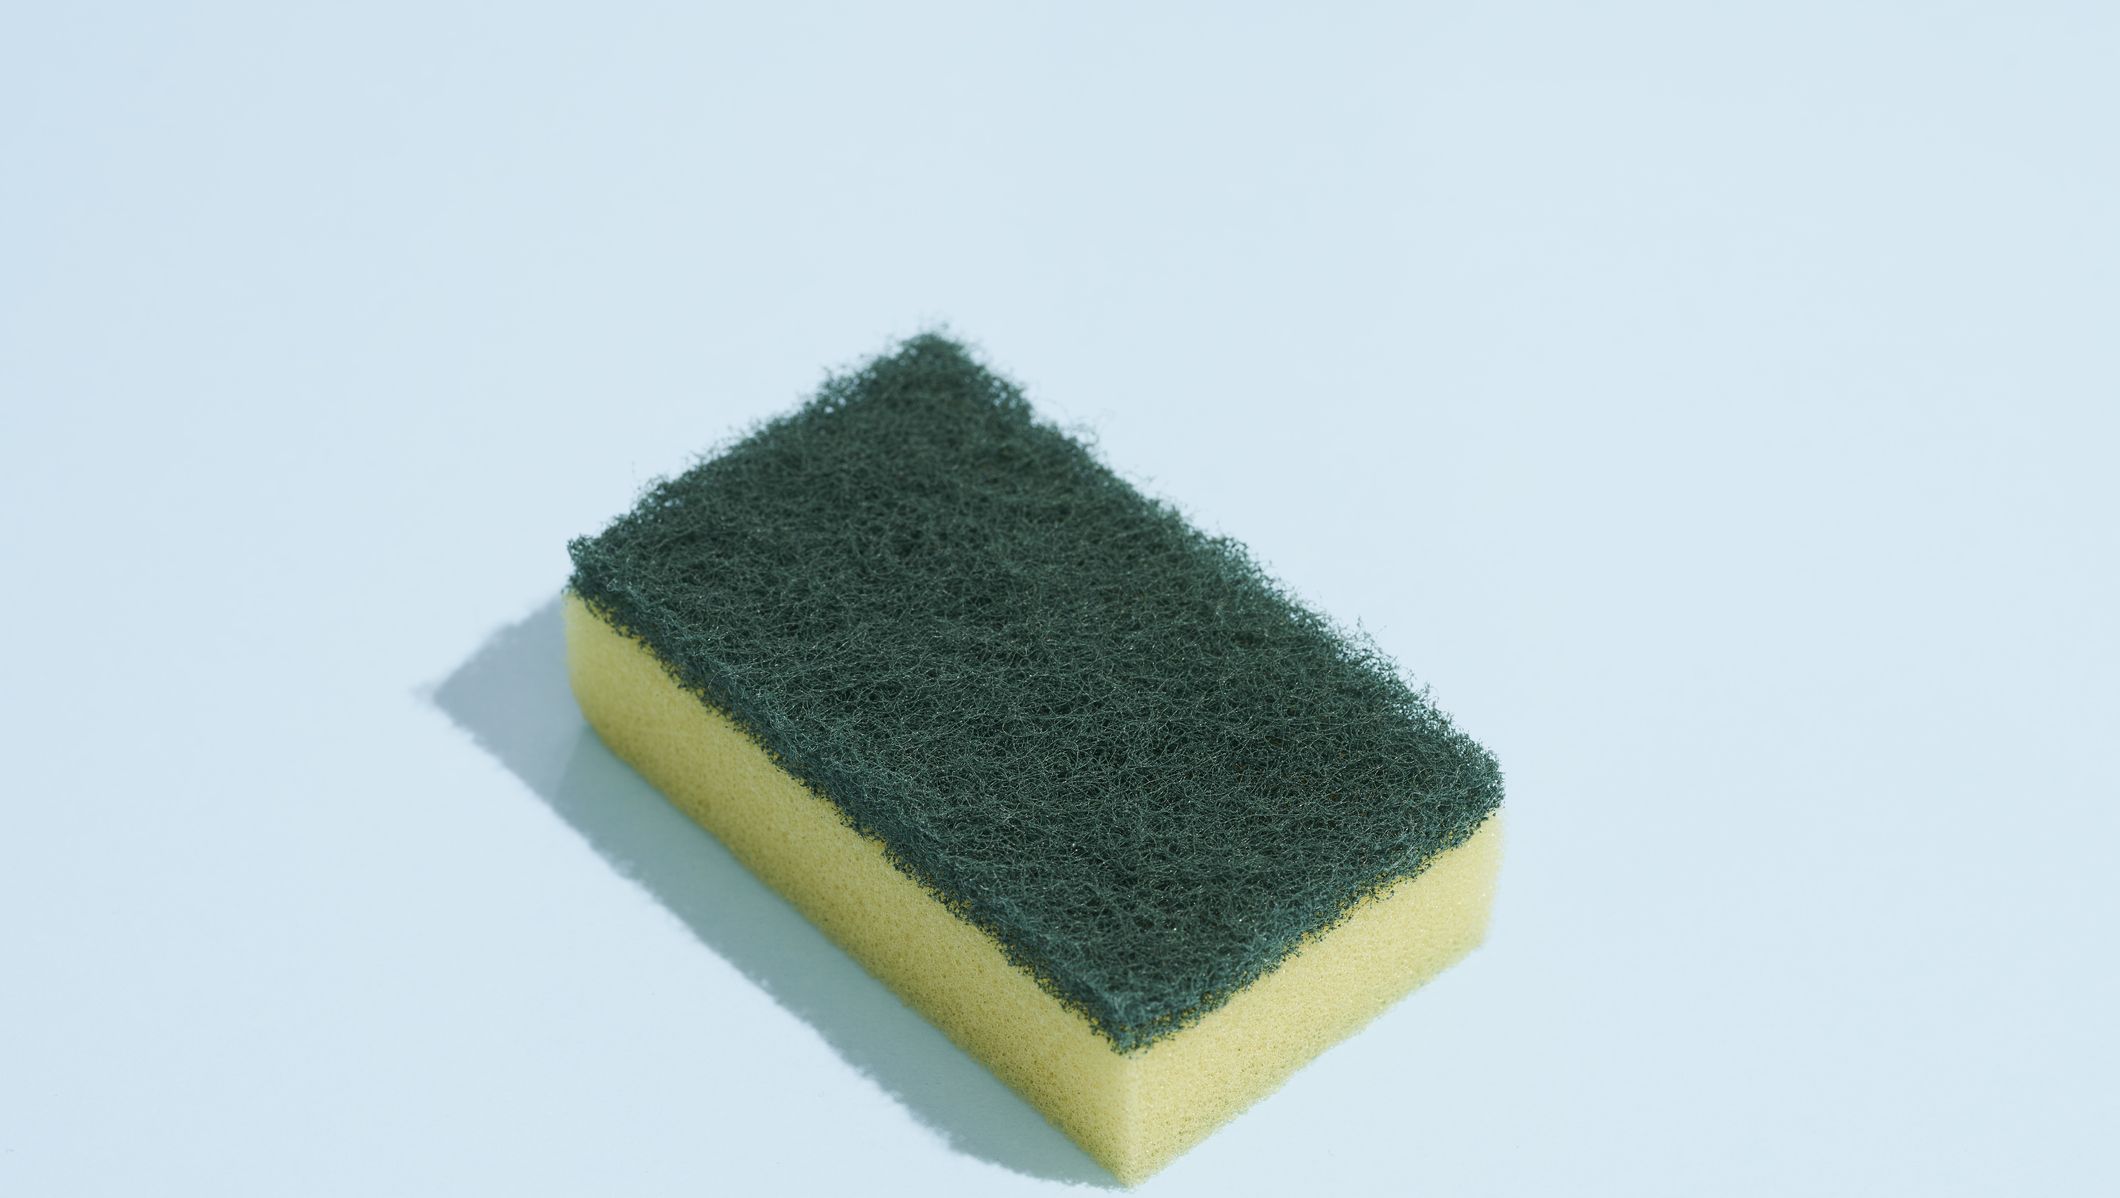 I Think This Is the Best Sponge for Washing Dishes : Food Network